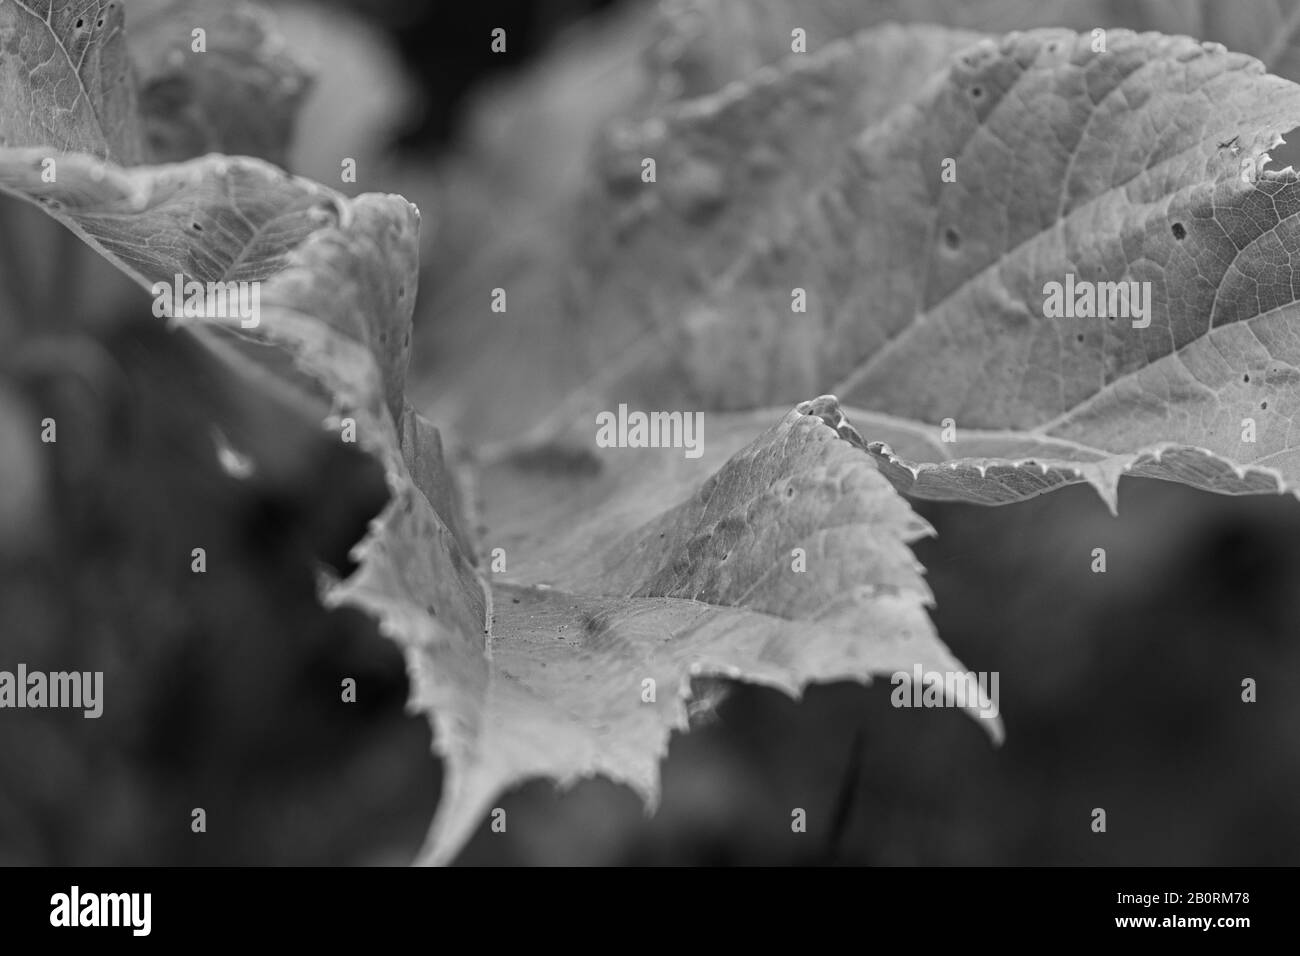 A close up black and white image of a giant hogweed leaf Stock Photo